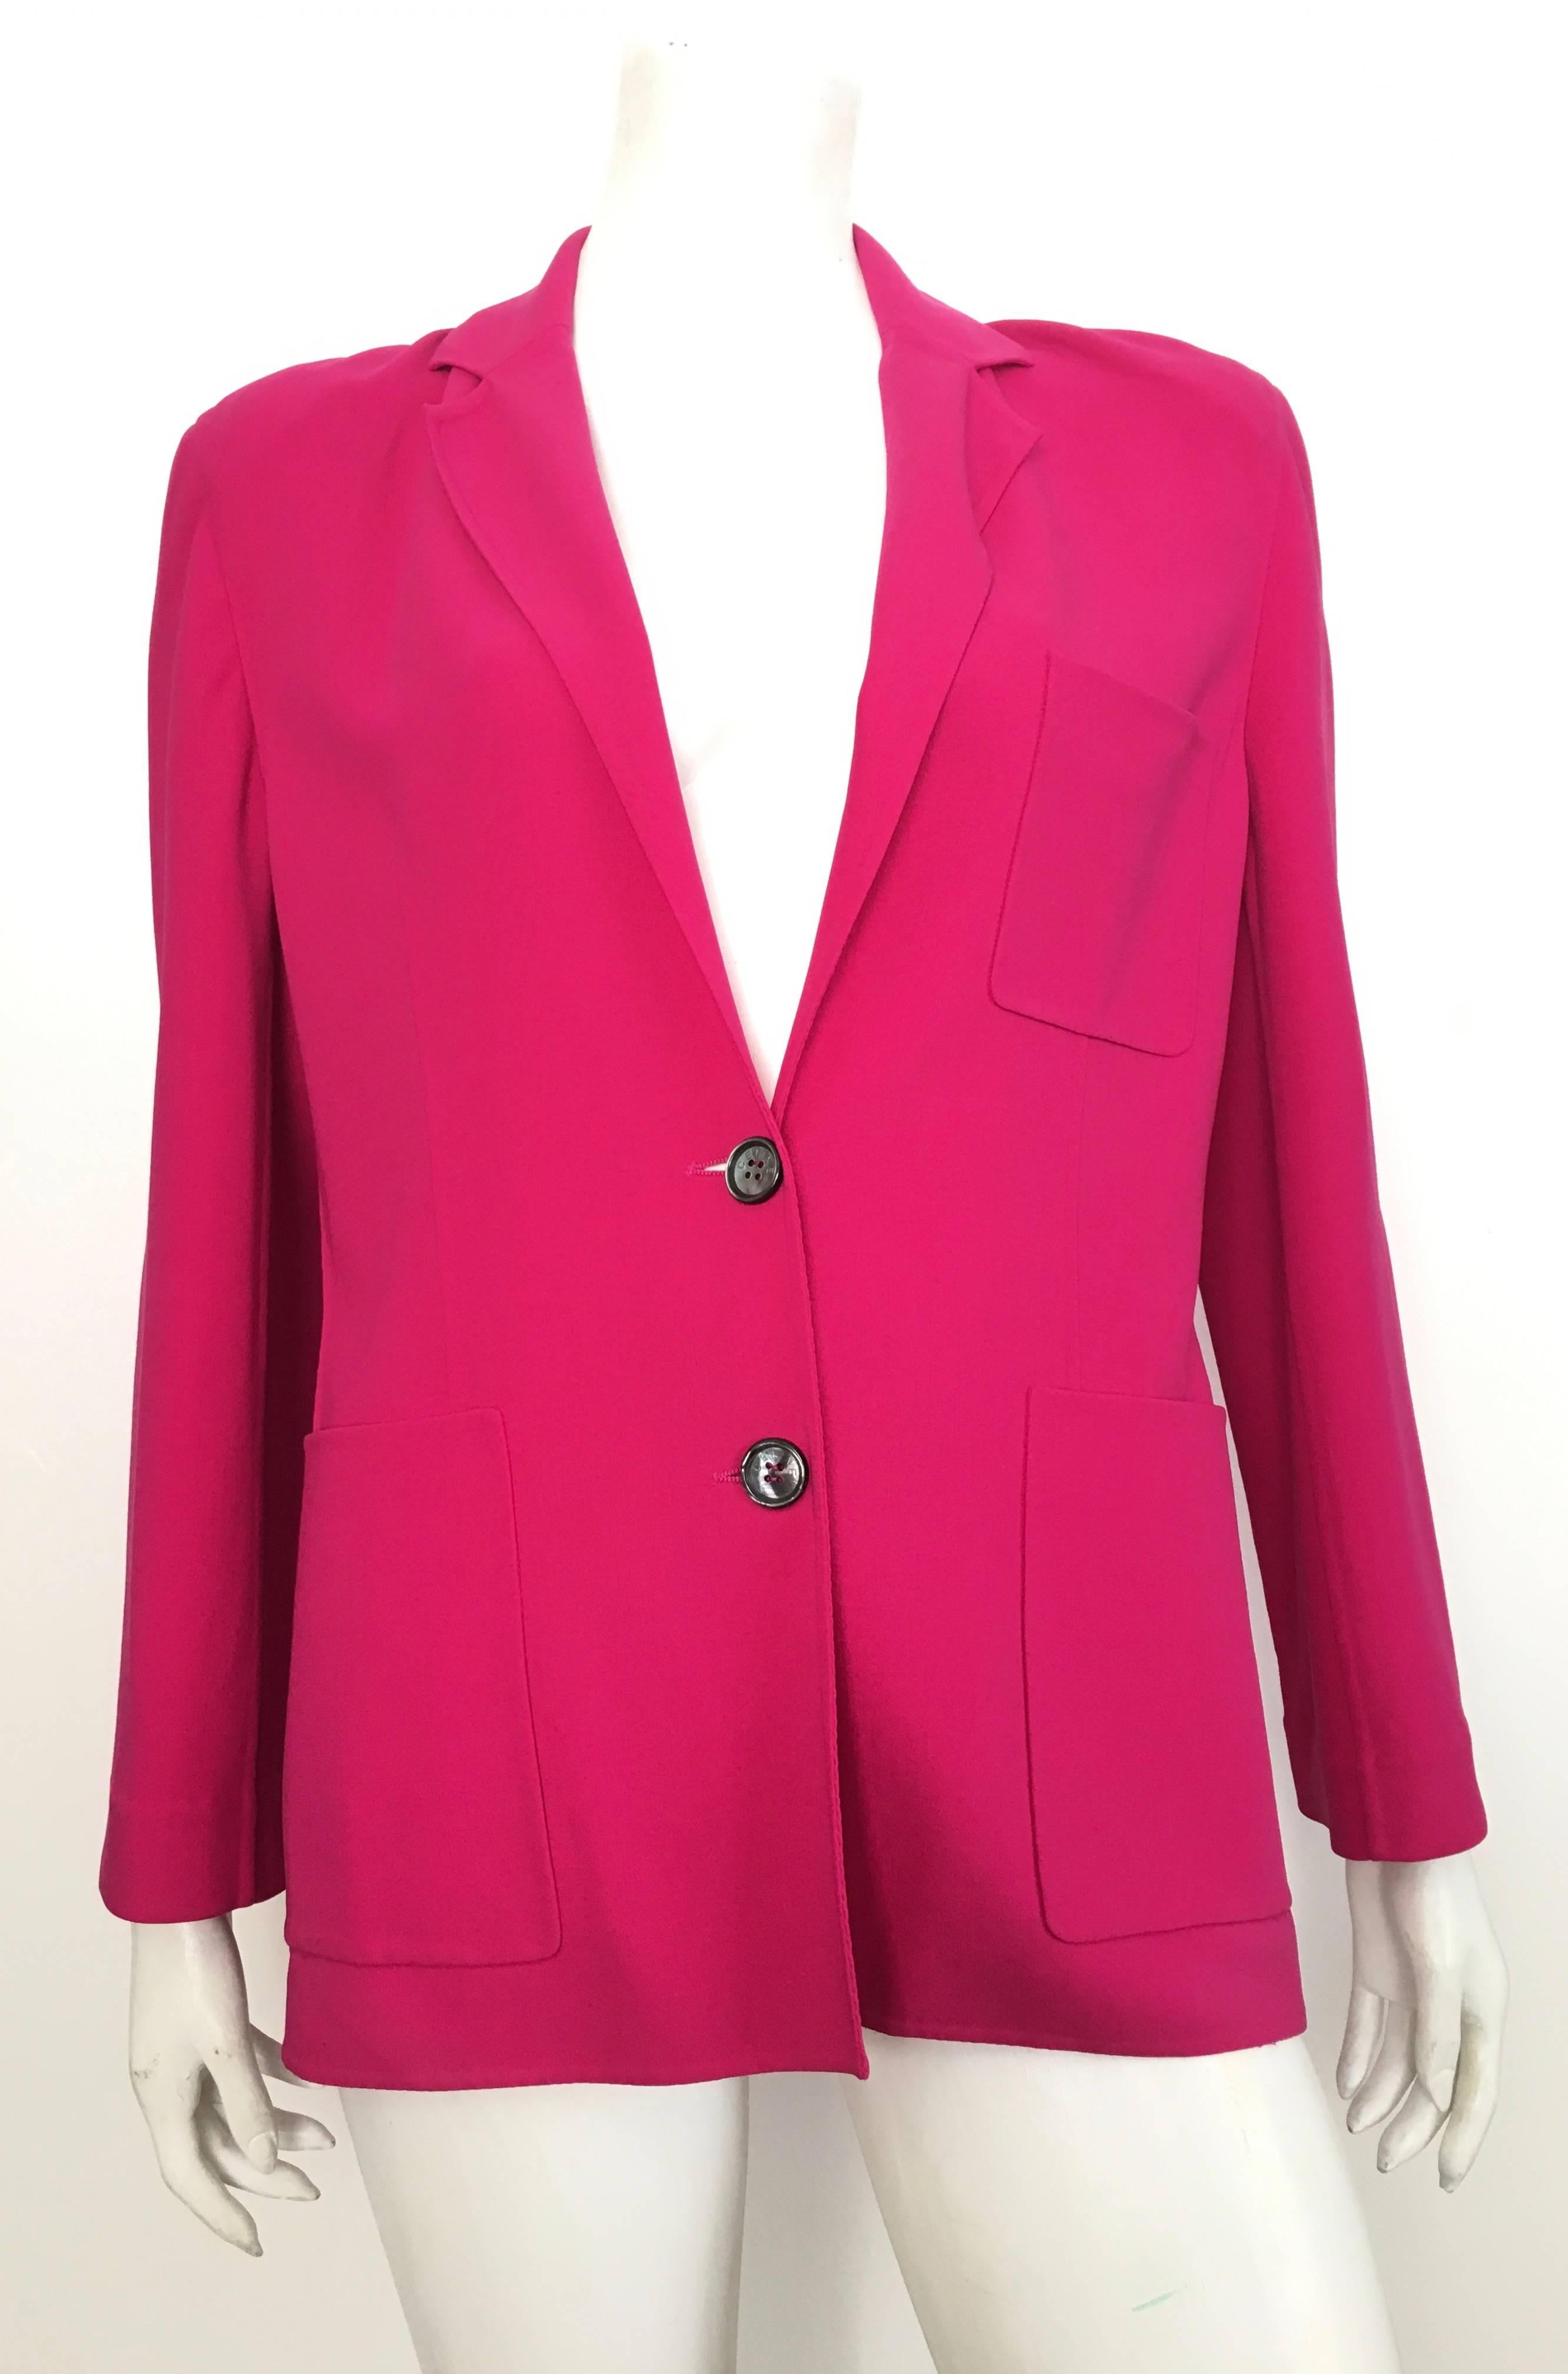 Celine pink wool two button jacket with pockets is a French size 42 and fits an USA size 8.  This Celine jacket is the only jacket you will need for spring / summer.  The color is very bold and very powerful, this is a statement piece to add to any